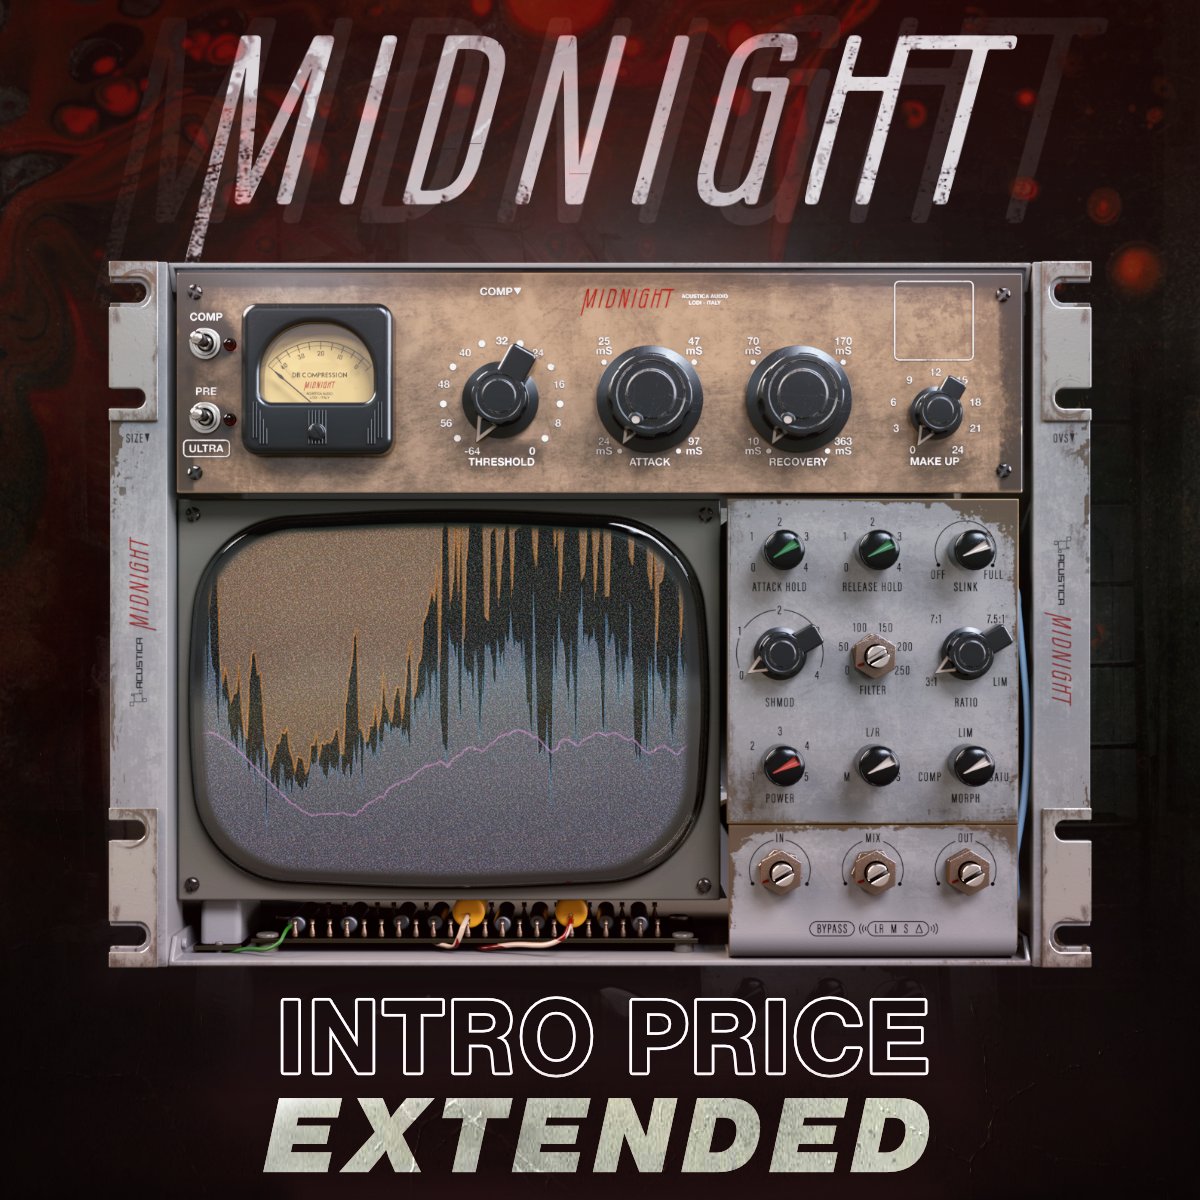 Acustica Audio on X: Last chance to seize the extended intro price for  Midnight! 🌙✨ Enhance your sound with advanced vari-mu tube compression  featuring low aliasing and versatile controls. Grab it now